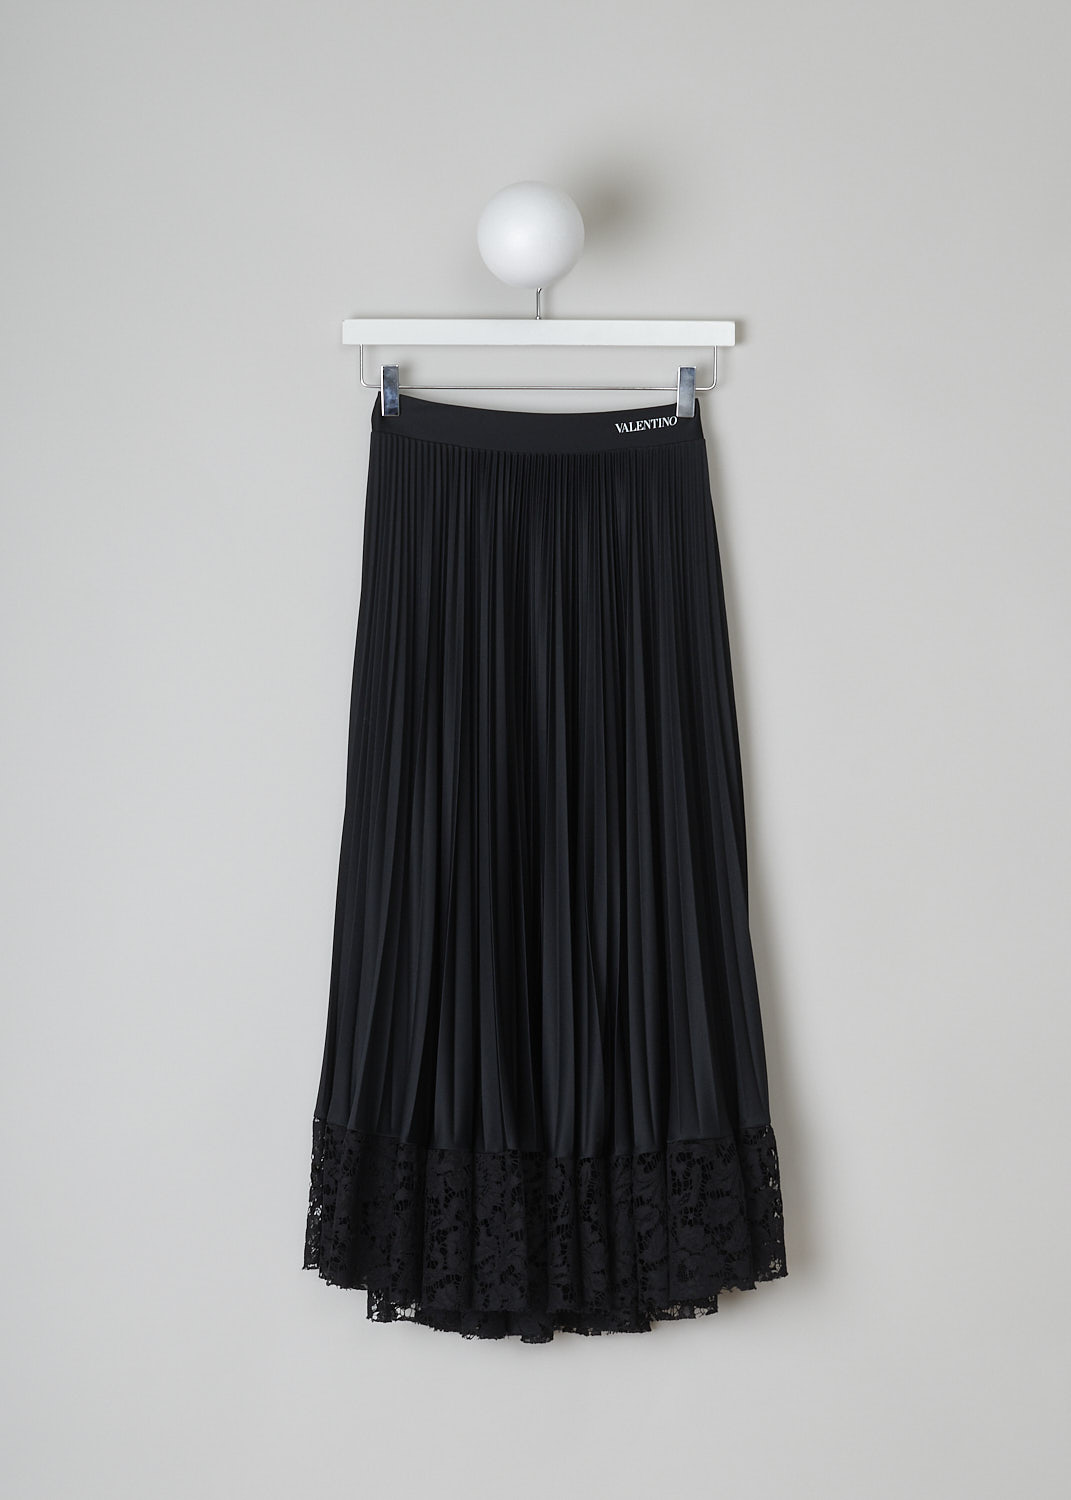 VALENTINO, BLACK PLEATED SKIRT WITH LACE TRIM, TB3MD01H575_0N0, Black, Front, This black pleated skirt has a partly elasticated waistband with the brand's logo on it to one side. The skirt has a below-the-knee length. The straight hemline has a broad black lace trim.   
